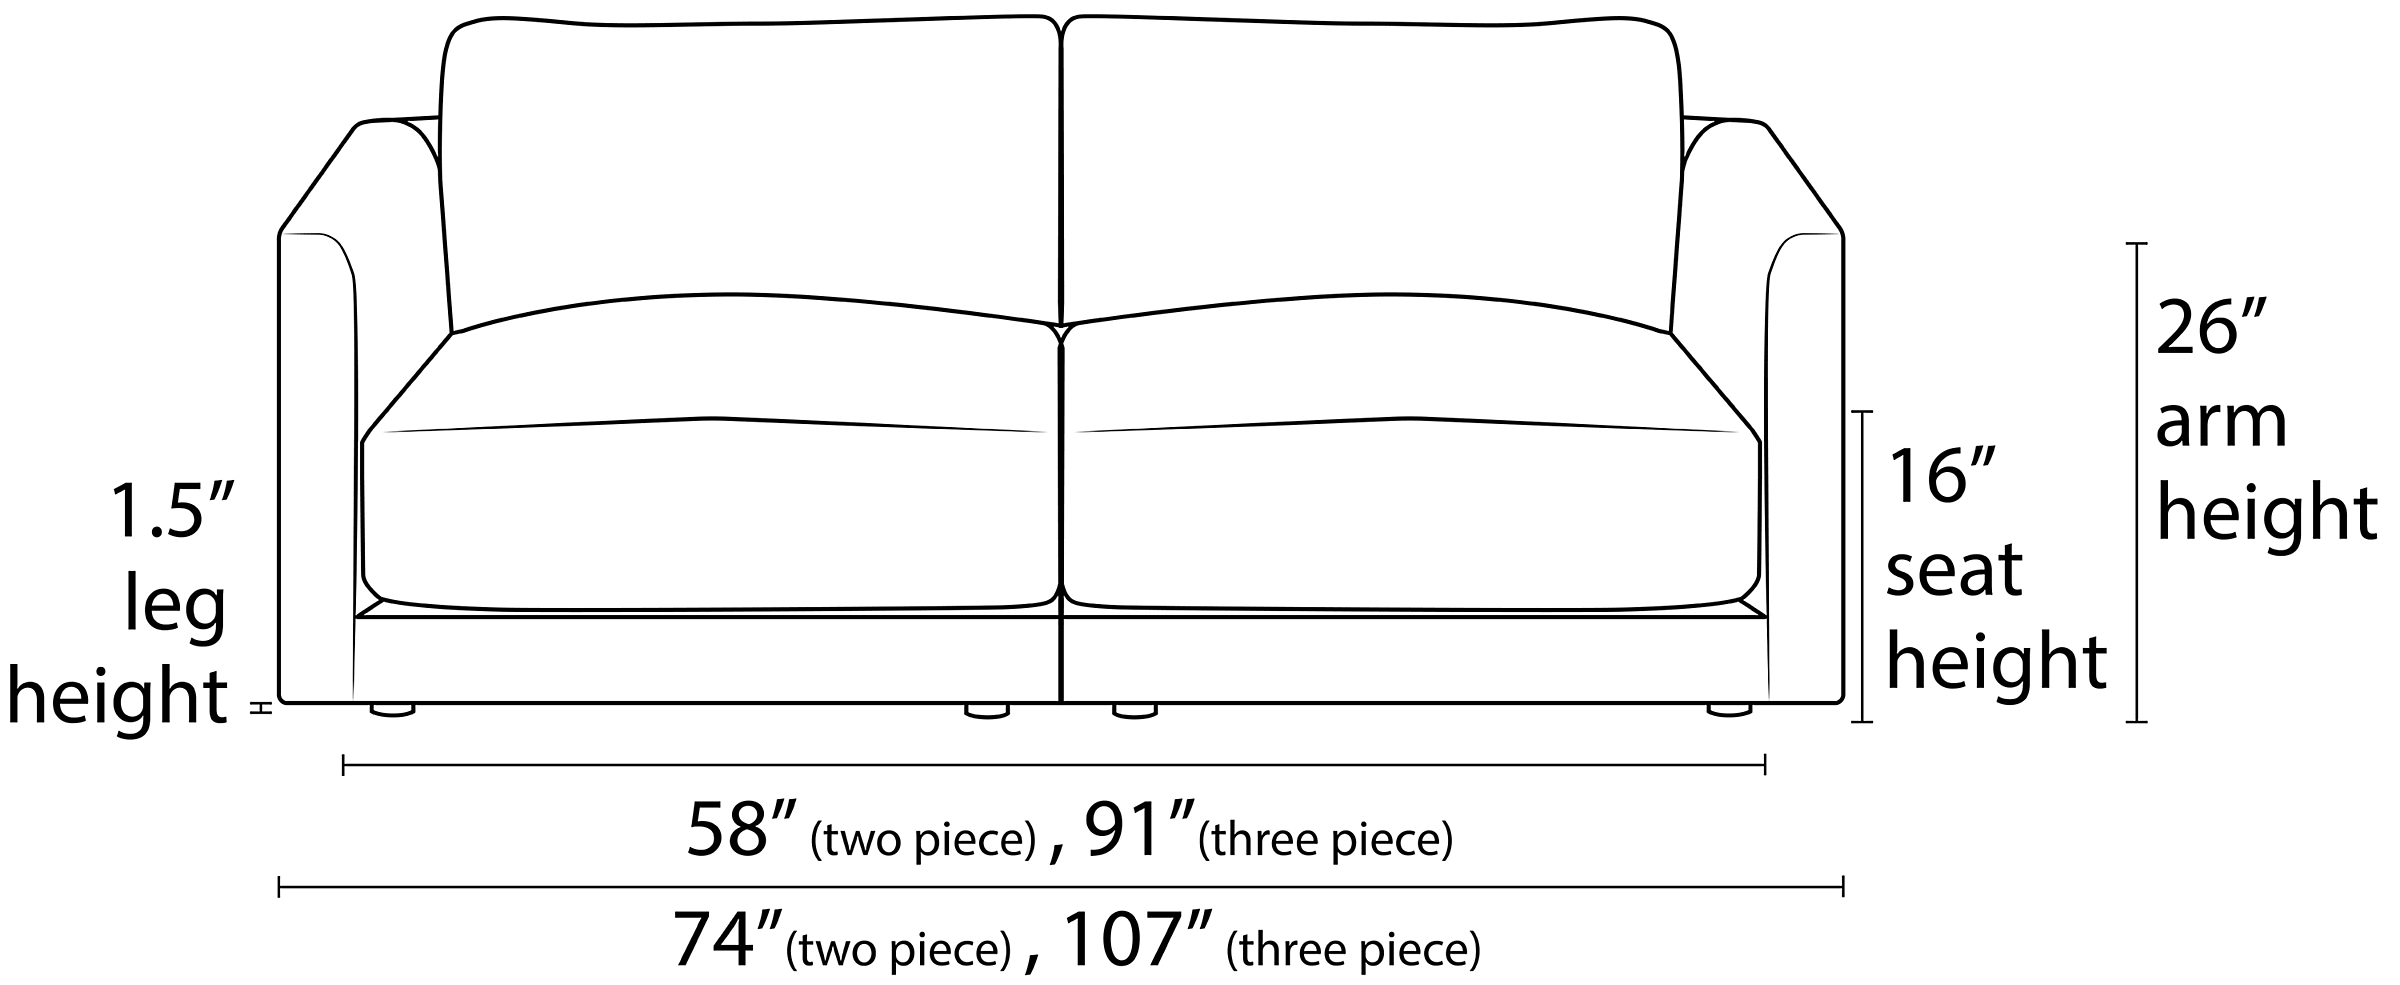 Clemens Sofa Front Dimension Drawing.